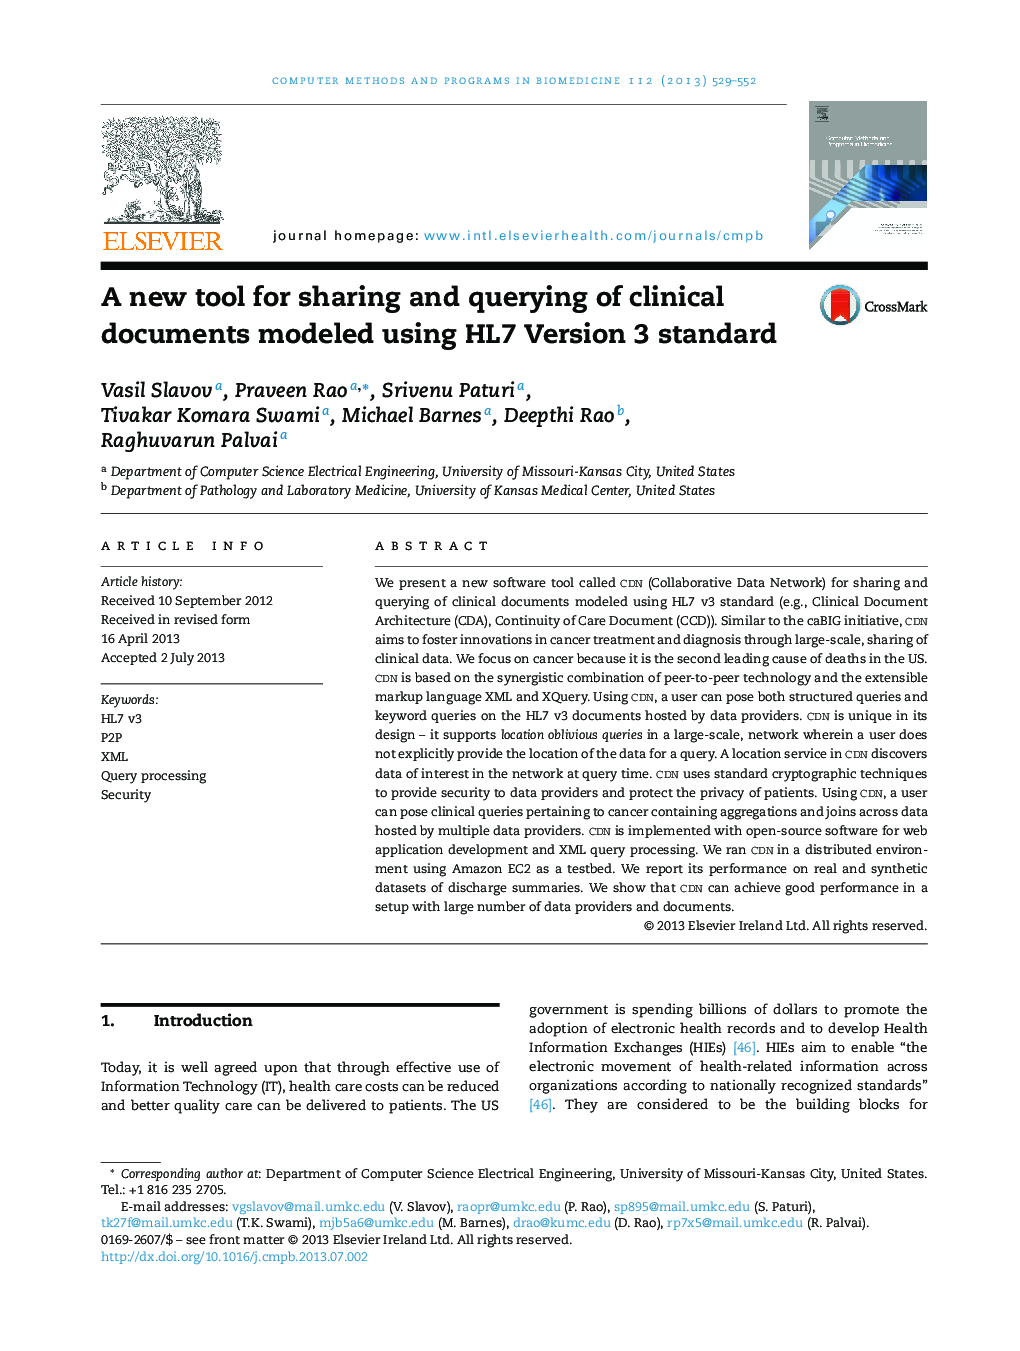 A new tool for sharing and querying of clinical documents modeled using HL7 Version 3 standard